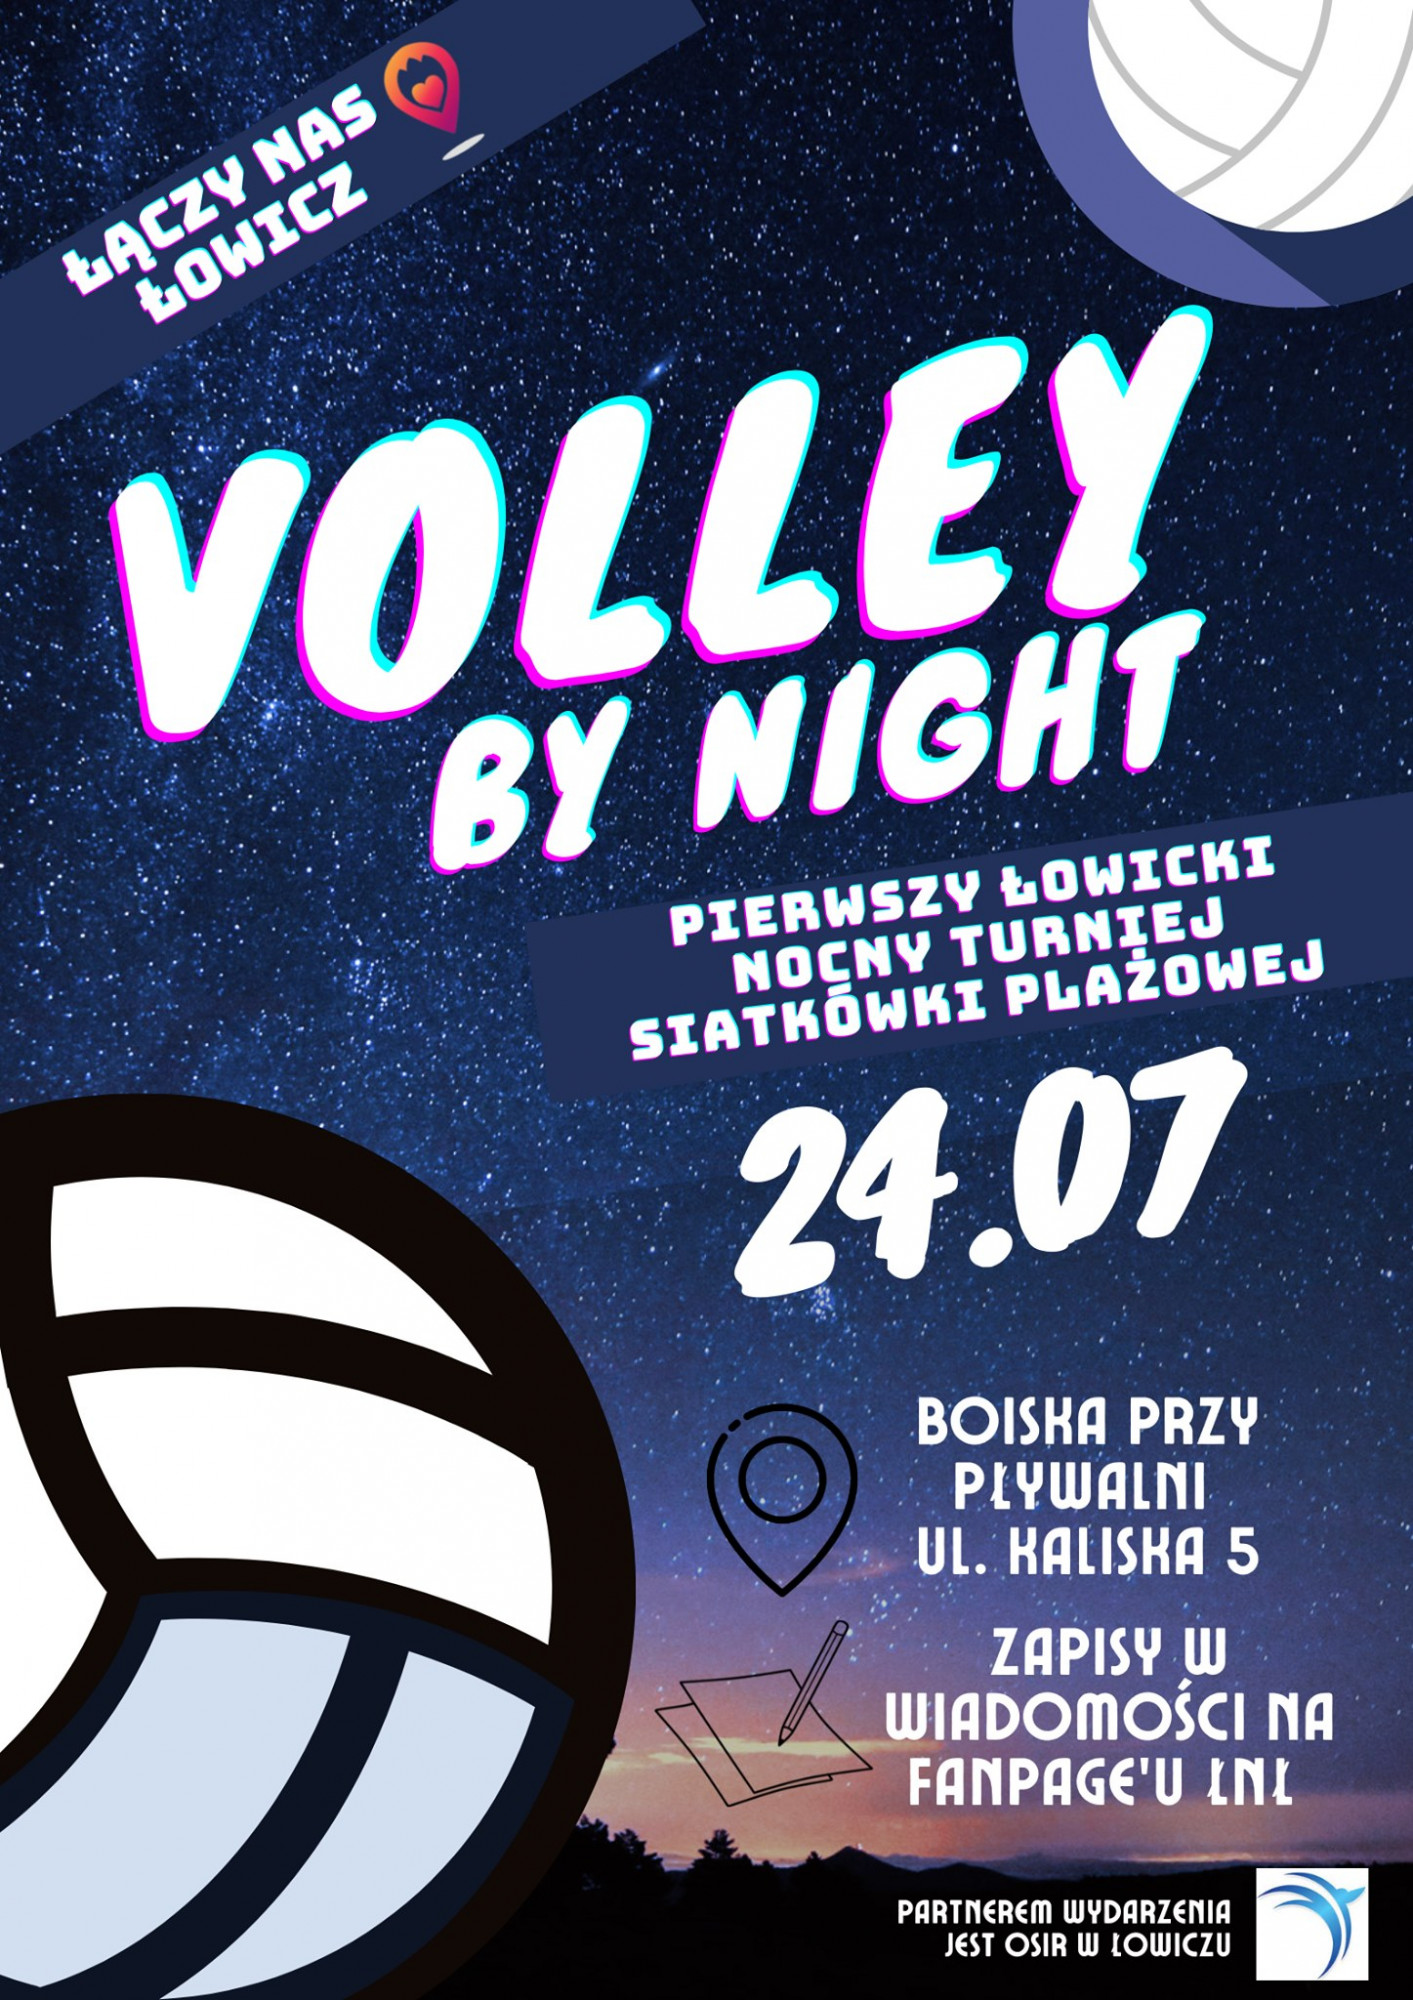 Fot.: Volley by Night.